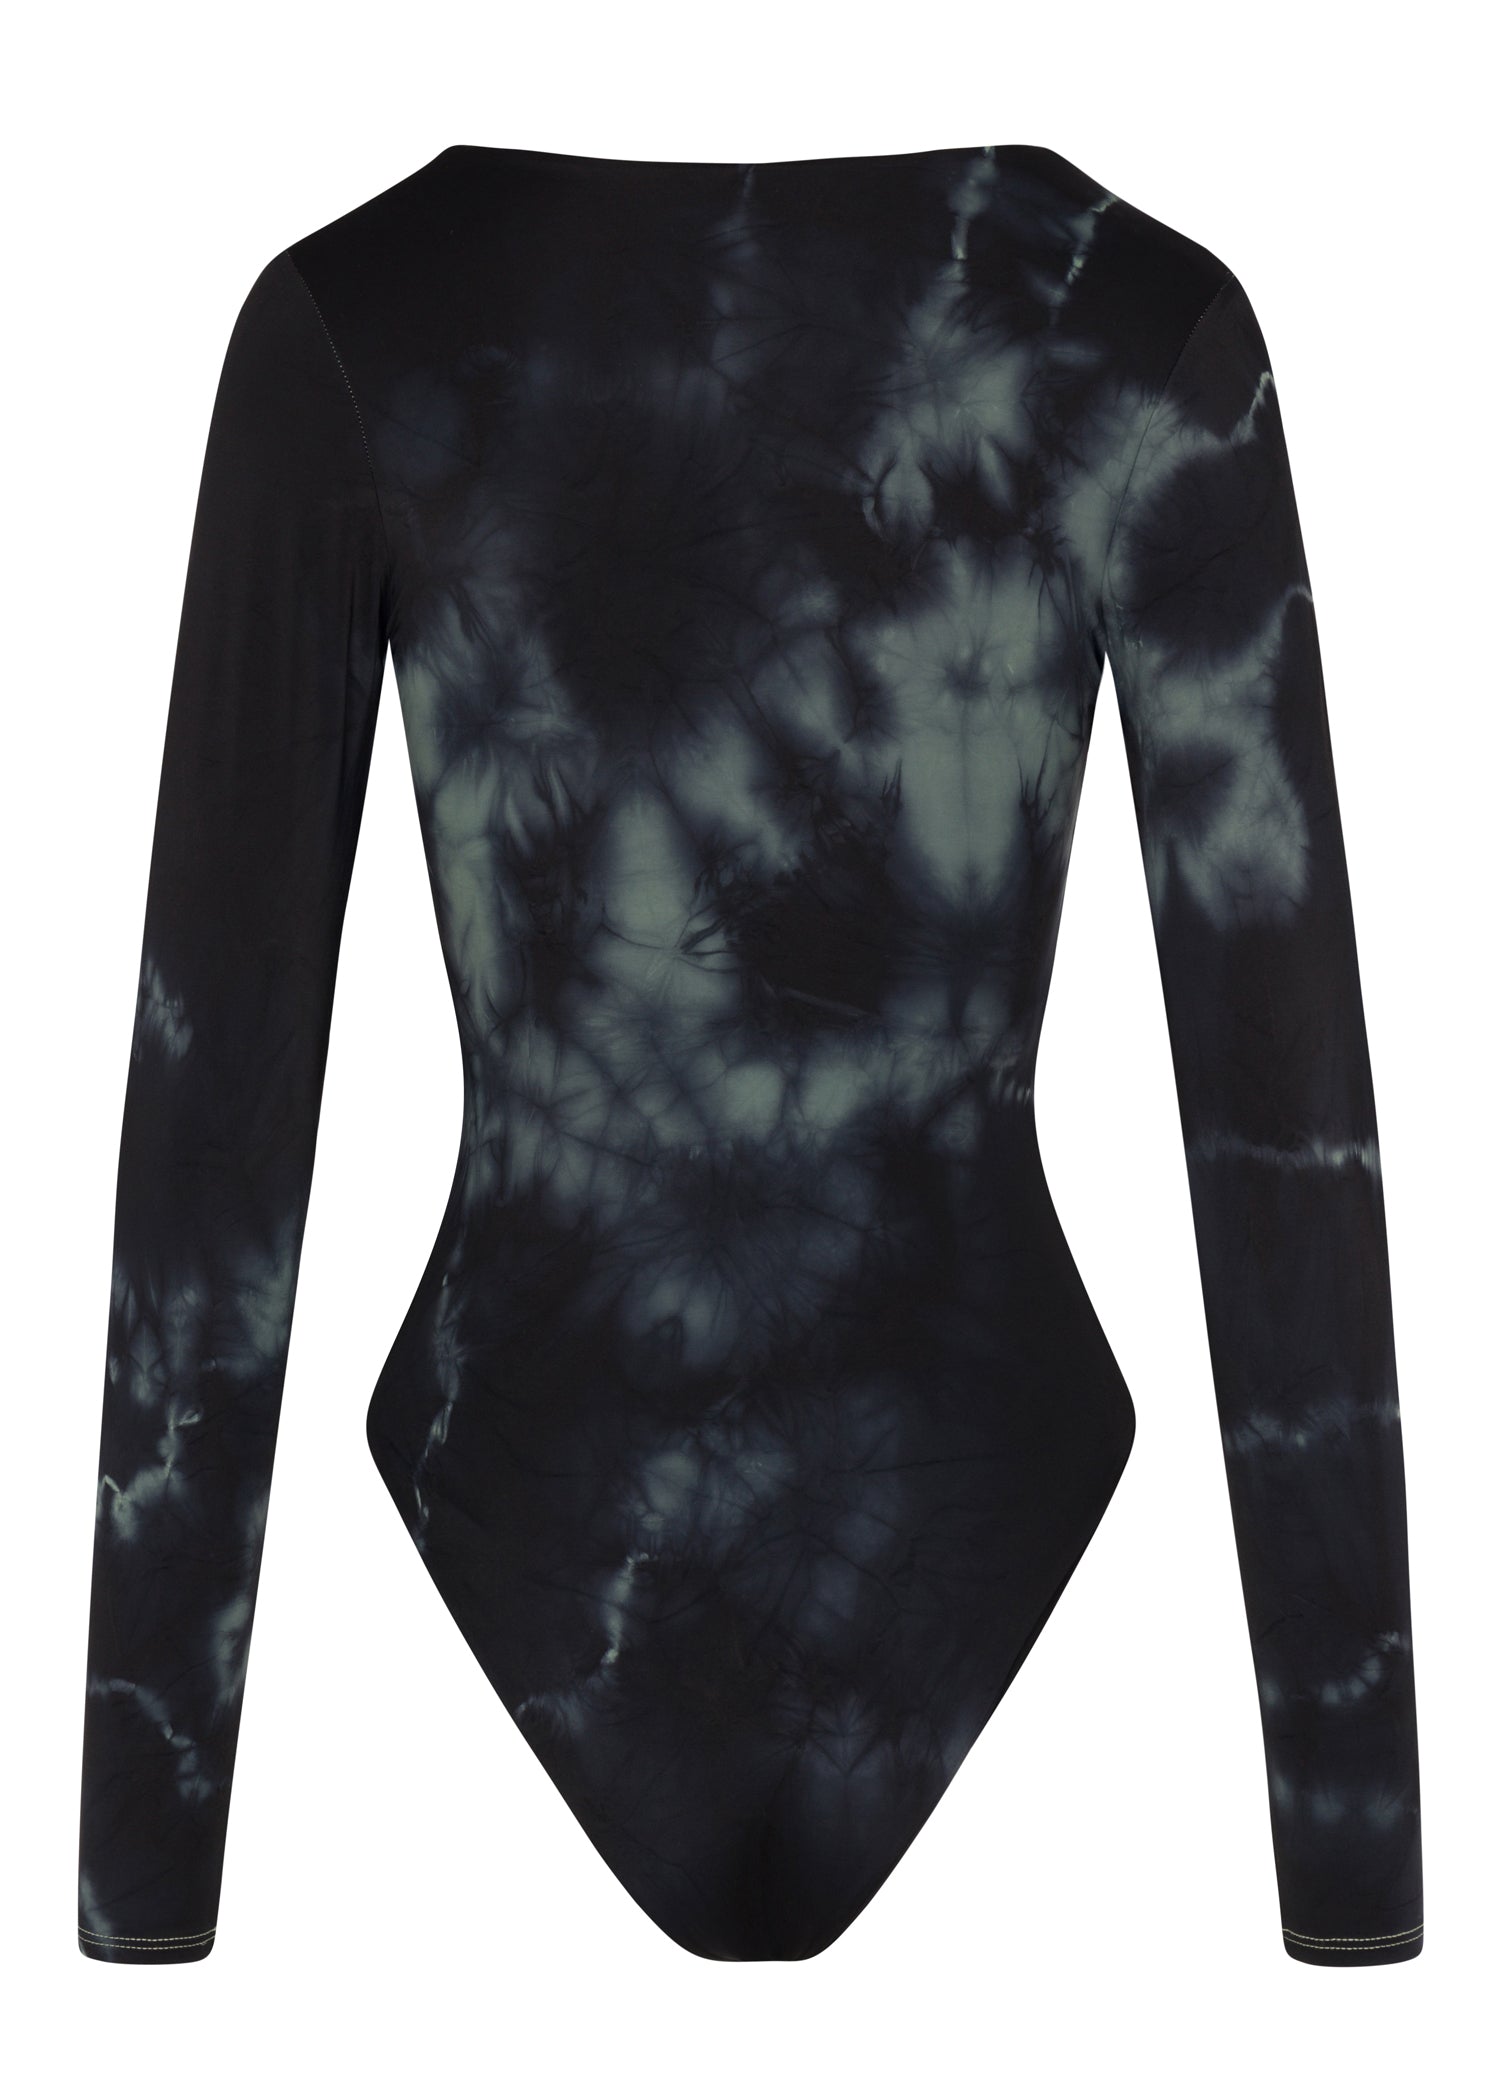 The Genesis Square Long Sleeve One Piece